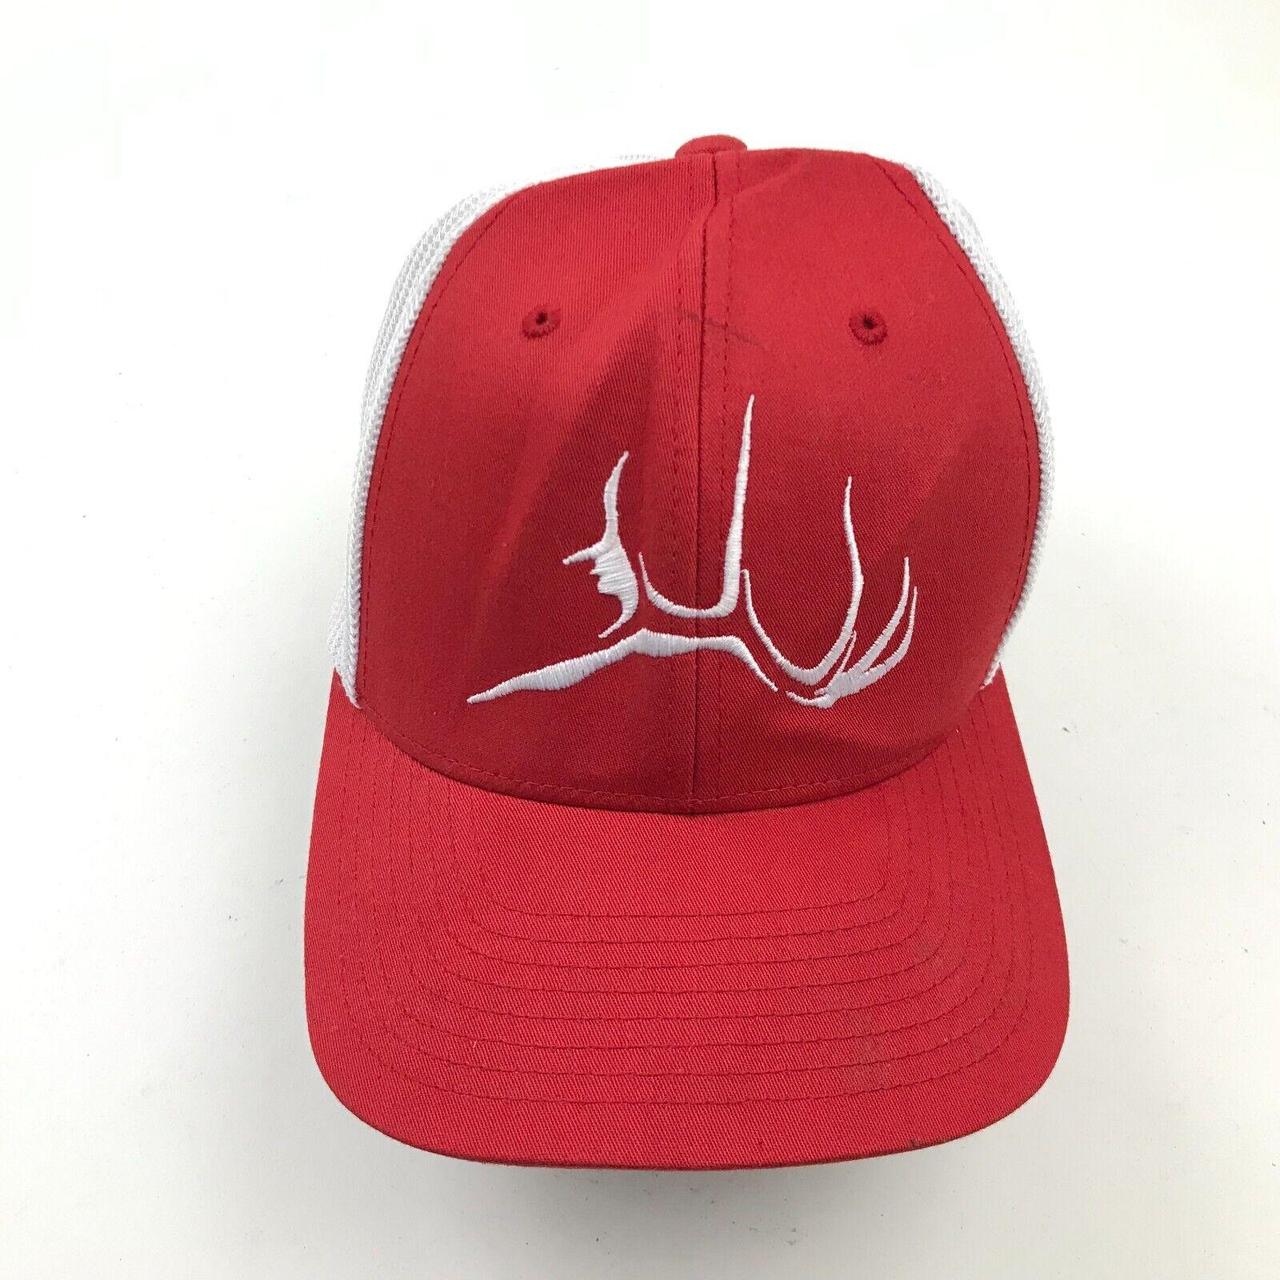 Hush Men's Red and White Hat